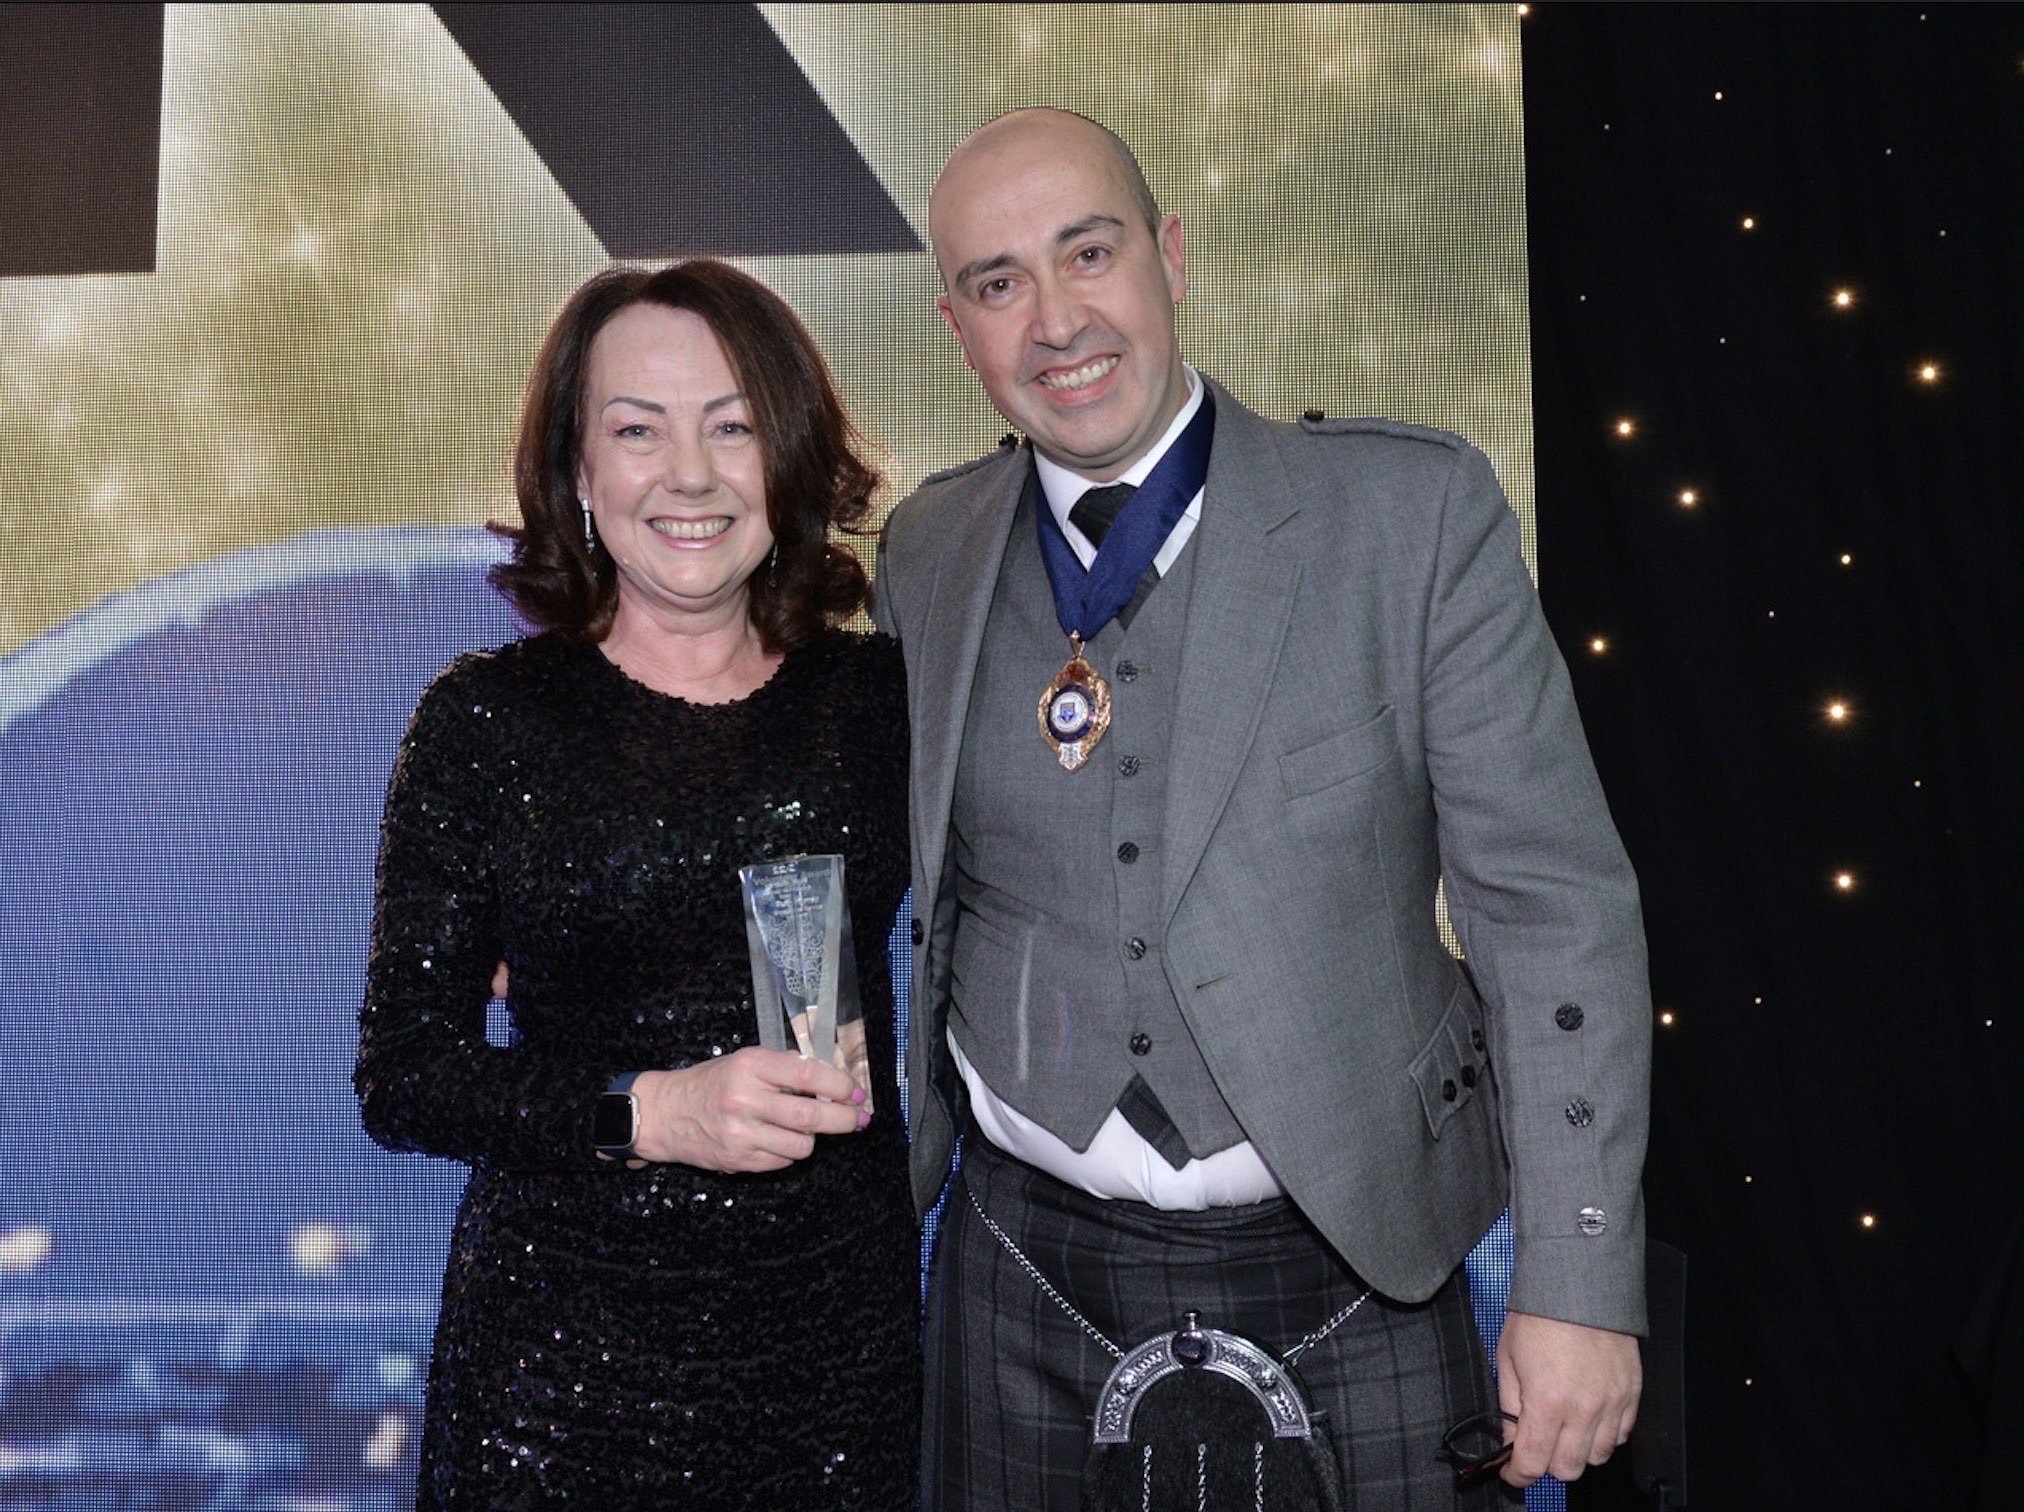 Ruth Murray receives exceptional service award from Chartered Insurance Institute